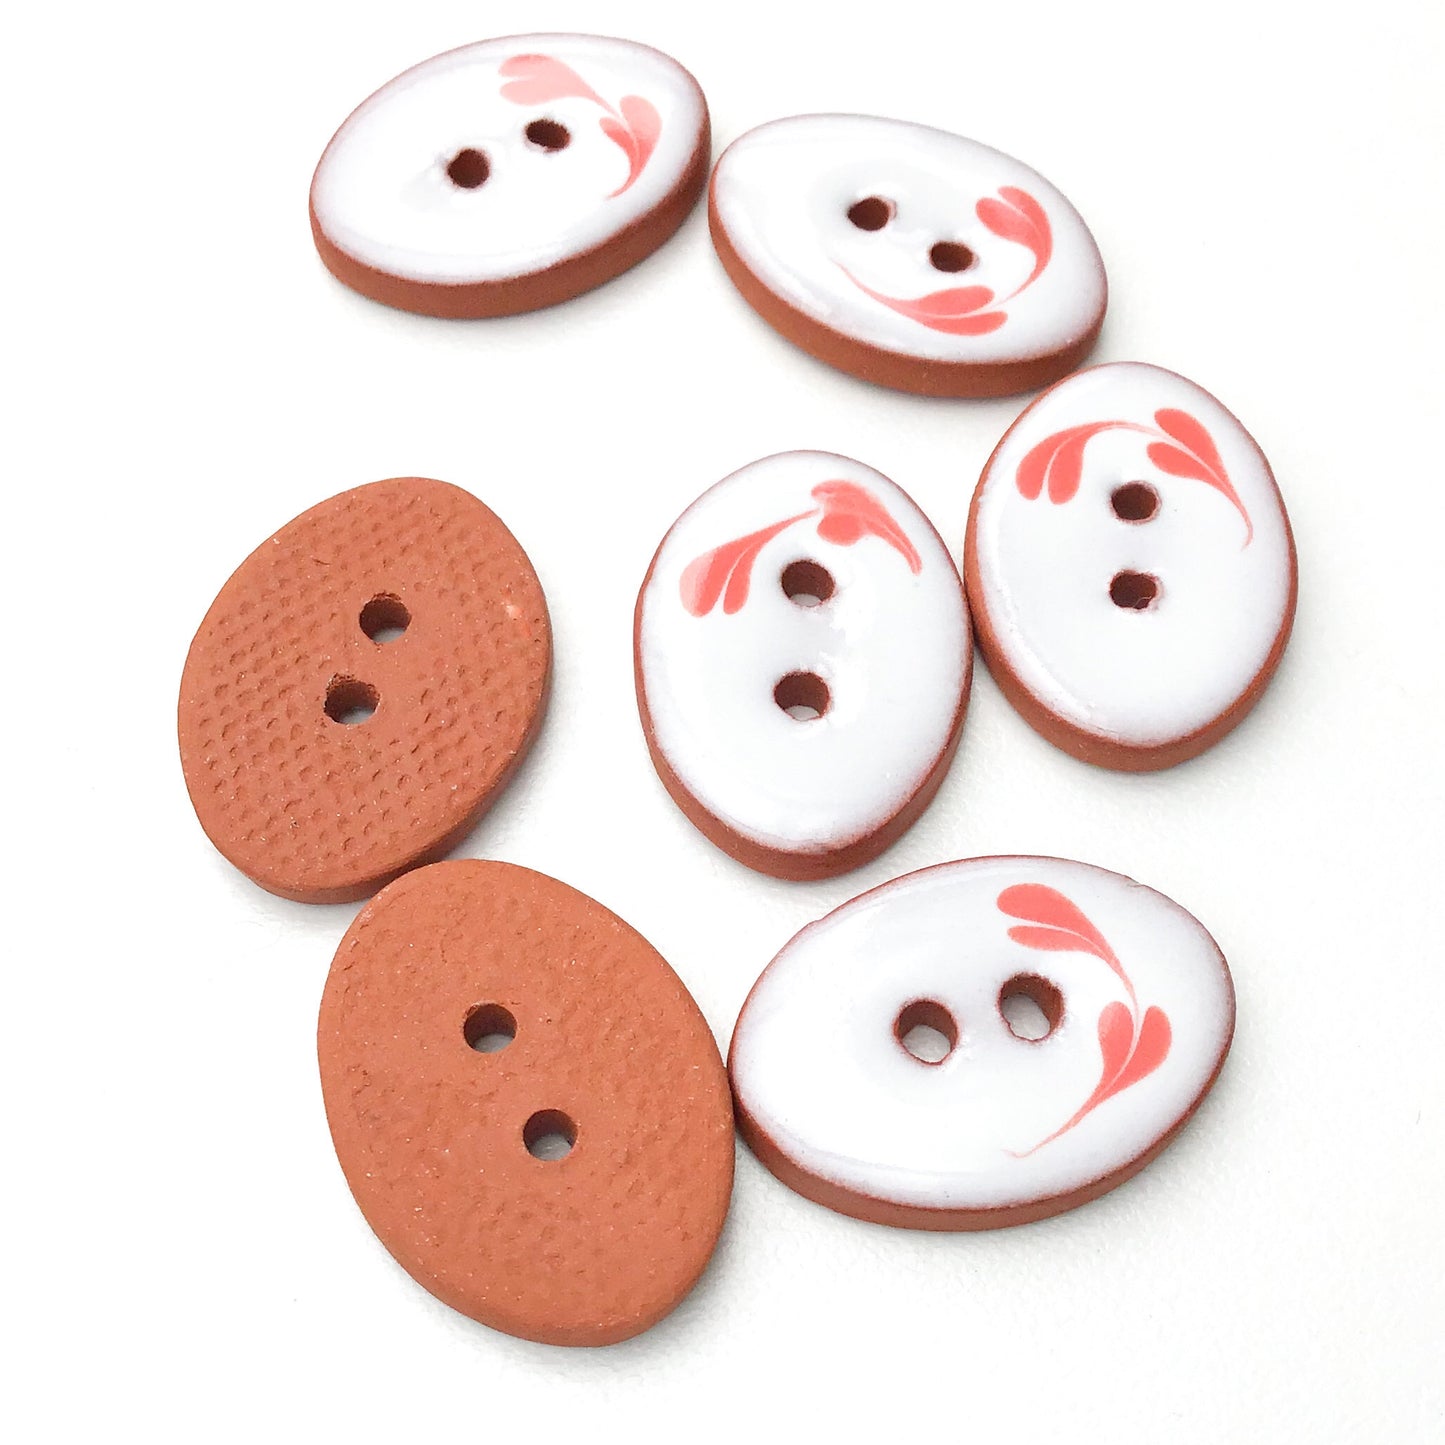 Oval Ceramic Buttons - Hand Painted Clay Buttons with Small Flower Detail - White + Pink - 5/8" x 7/8" - 7 Pack (ws-146)